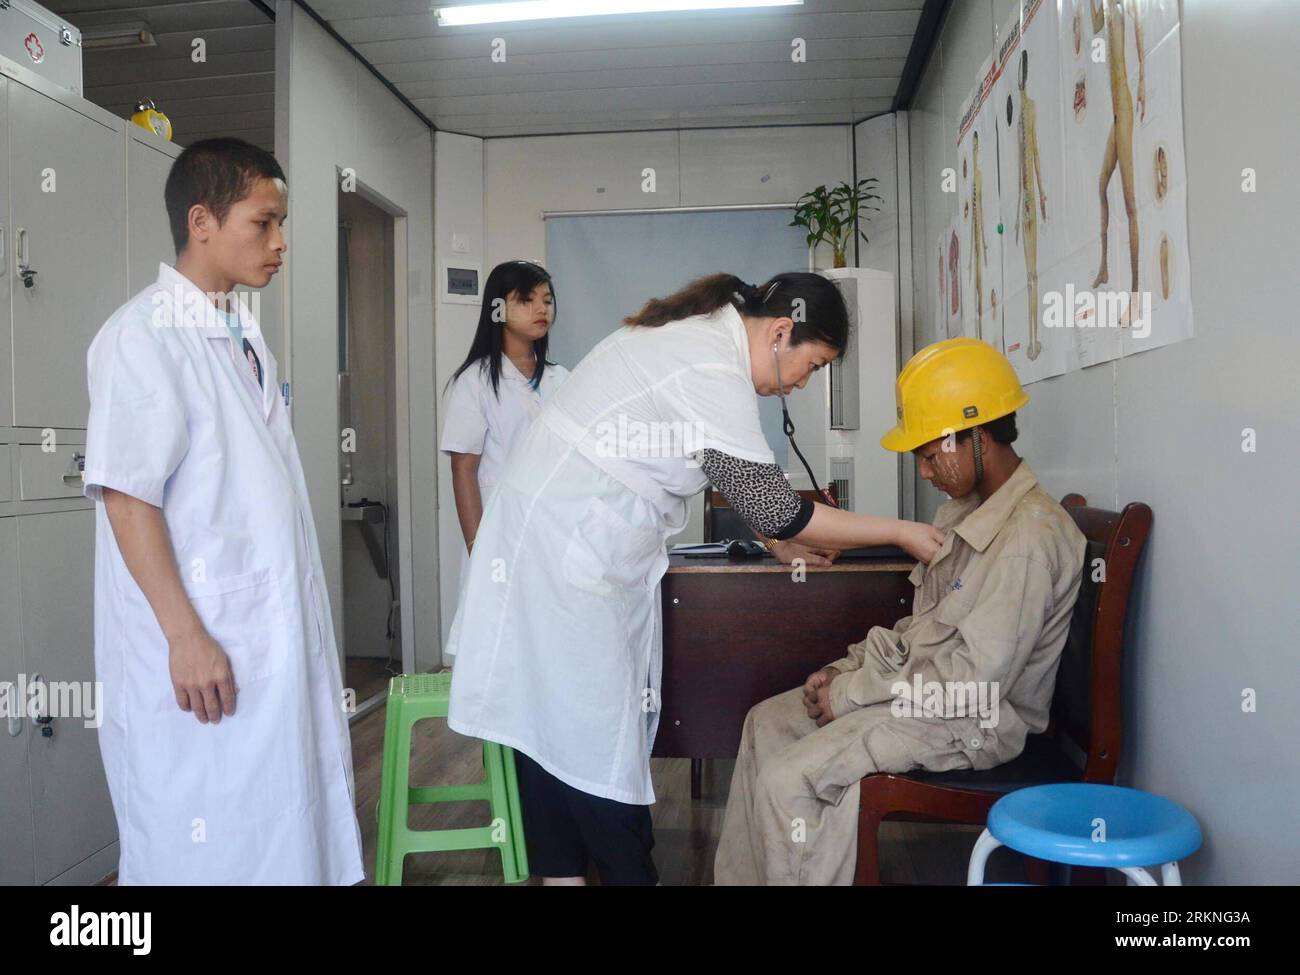 Bildnummer: 57116355  Datum: 27.02.2012  Copyright: imago/Xinhua (120228) -- MADE ISLAND, Feb. 28, 2012 (Xinhua) -- A Chinese doctor (2nd R) gives treatment to Myanmar workers at the Made Island project site in Rakhine state s Kyaukphyu, Myanmar, on Feb. 27, 2012. The project is being implemented by the China National Petroleum Corporation (CNPC) and related companies. The Myanmar vice president also said that he appreciated the Chinese company s support for Myanmar s charity undertakings. (Xinhua/Jin Fei)(dtf) MYANMAR-CRUDEOIL-PIPELINE PROJECT PUBLICATIONxNOTxINxCHN Wirtschaft Bodenschätze Fo Stock Photo